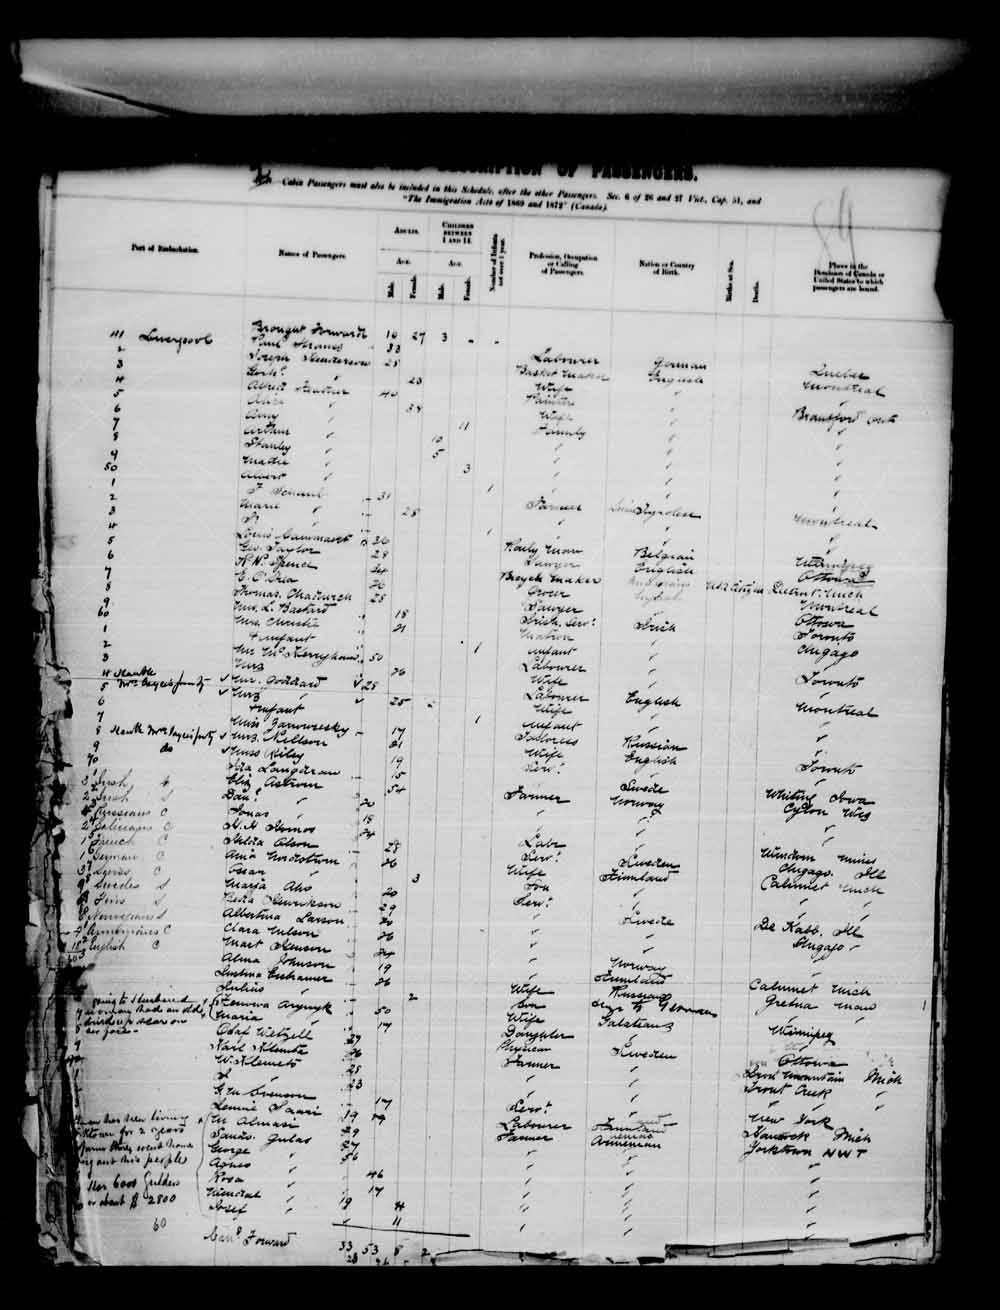 Digitized page of Passenger Lists for Image No.: e003555390